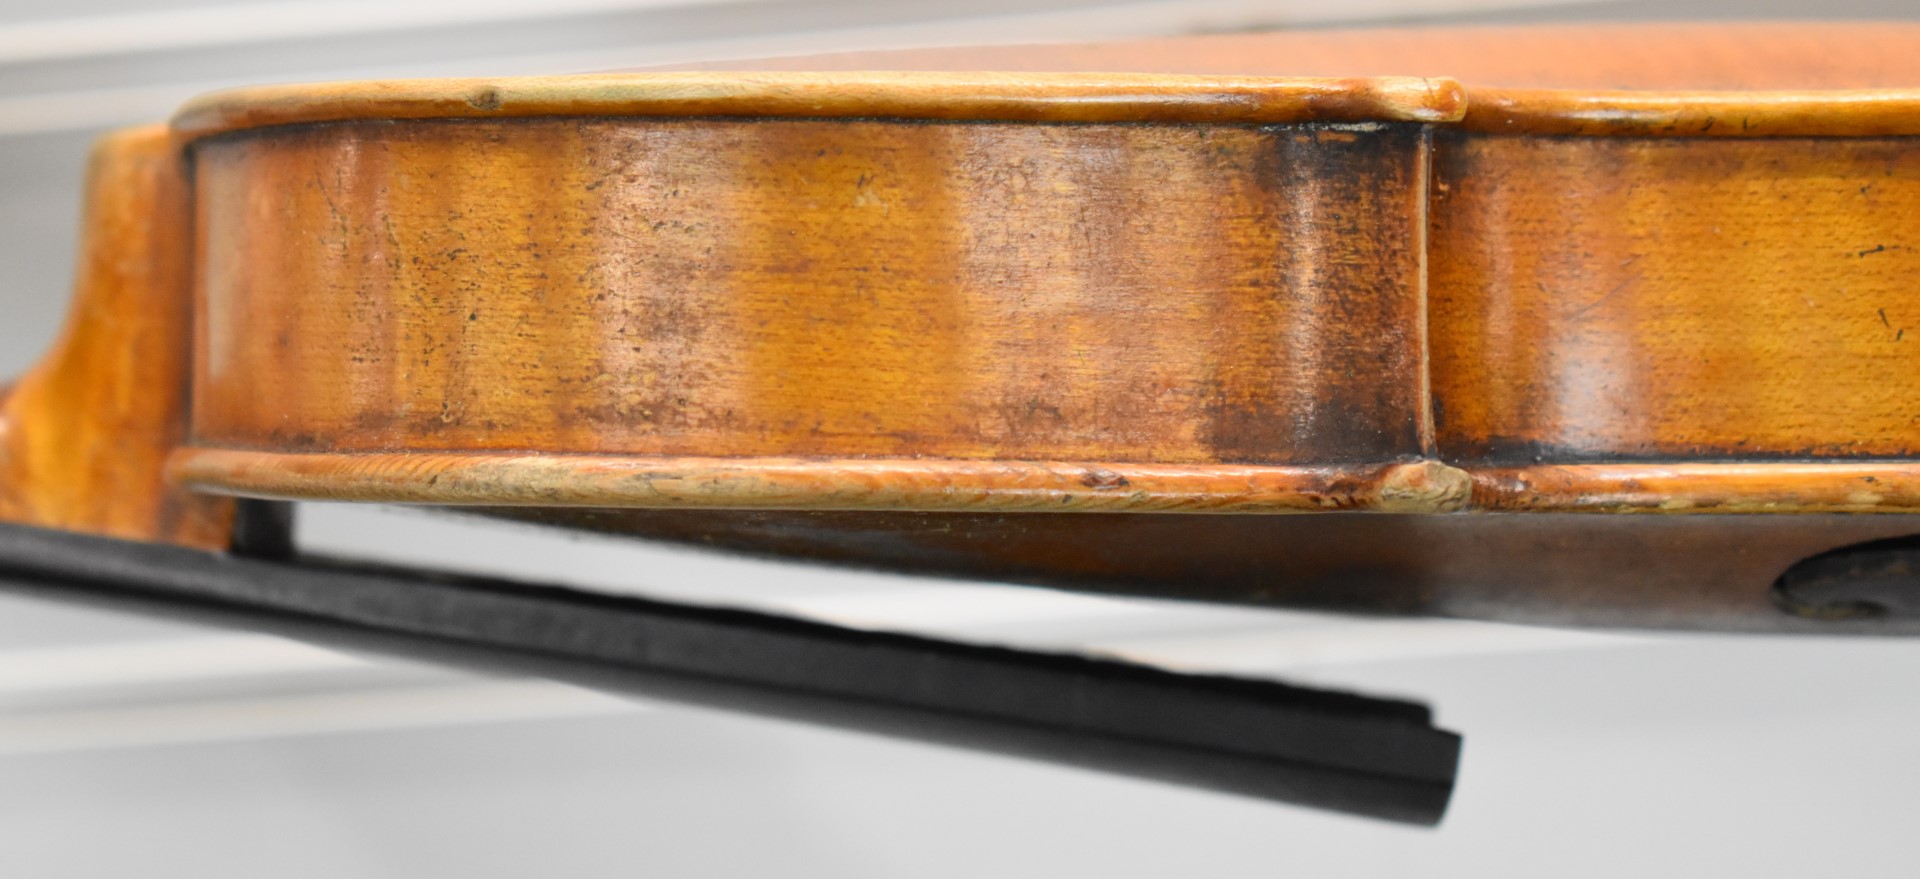 Late 19th / early 20thC violin labelled Antonius Stradivarius Cremonesis 1727 A&S with flame two - Image 8 of 17